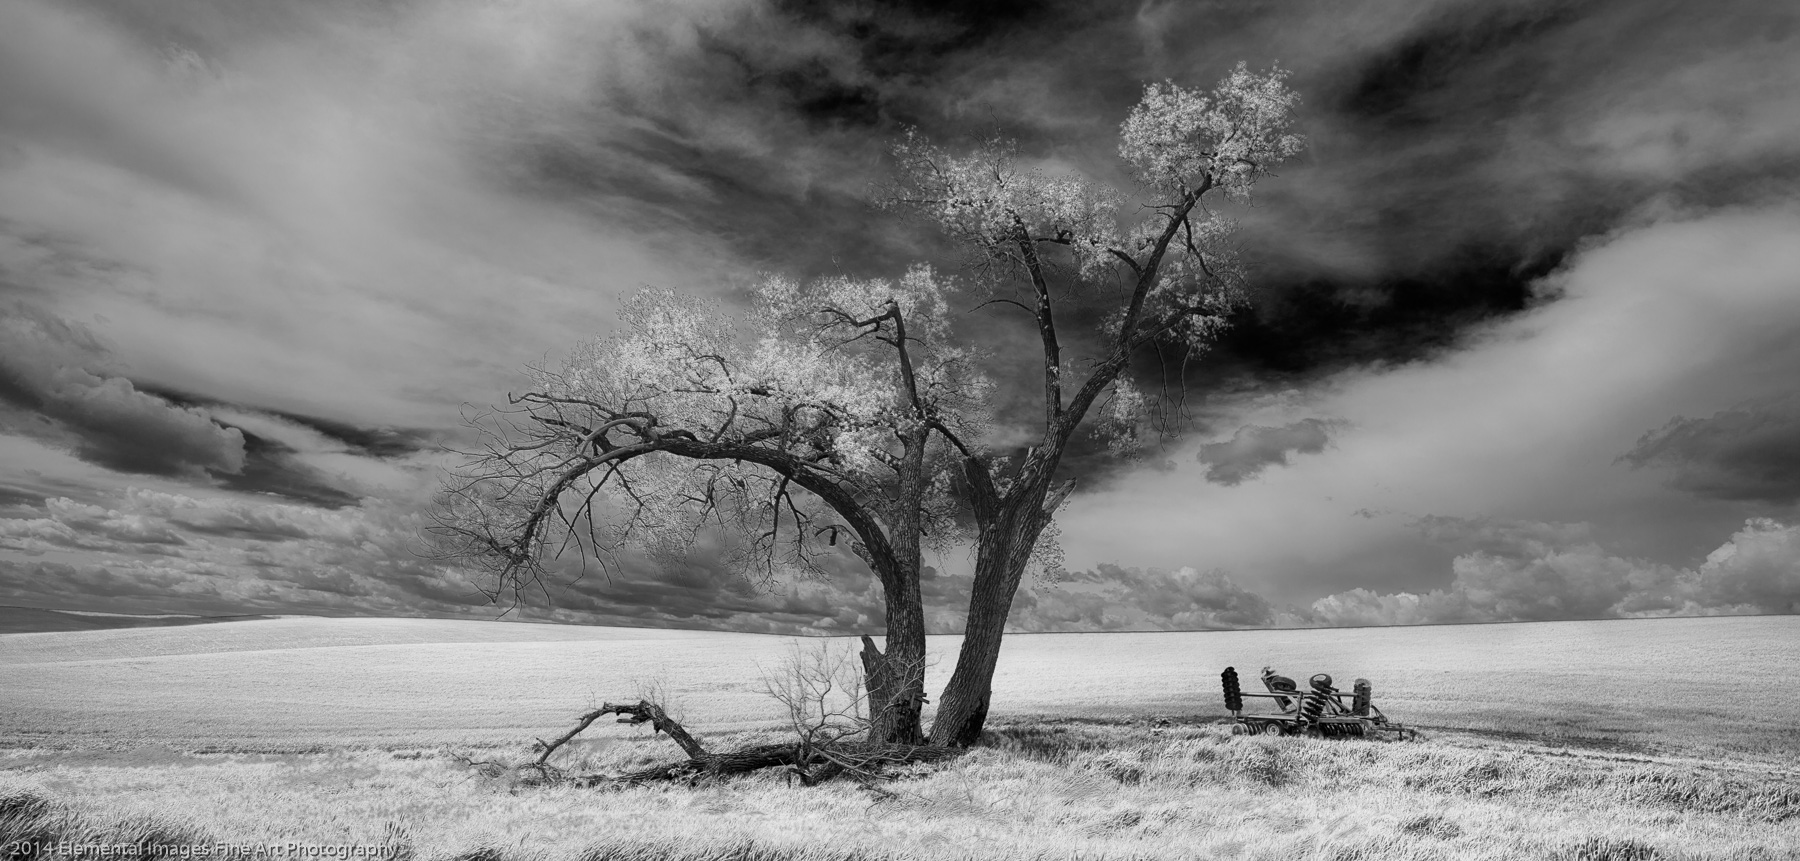 Lone Tree with Farm Equipment |  |  |  - © 2014 Elemental Images Fine Art Photography - All Rights Reserved Worldwide